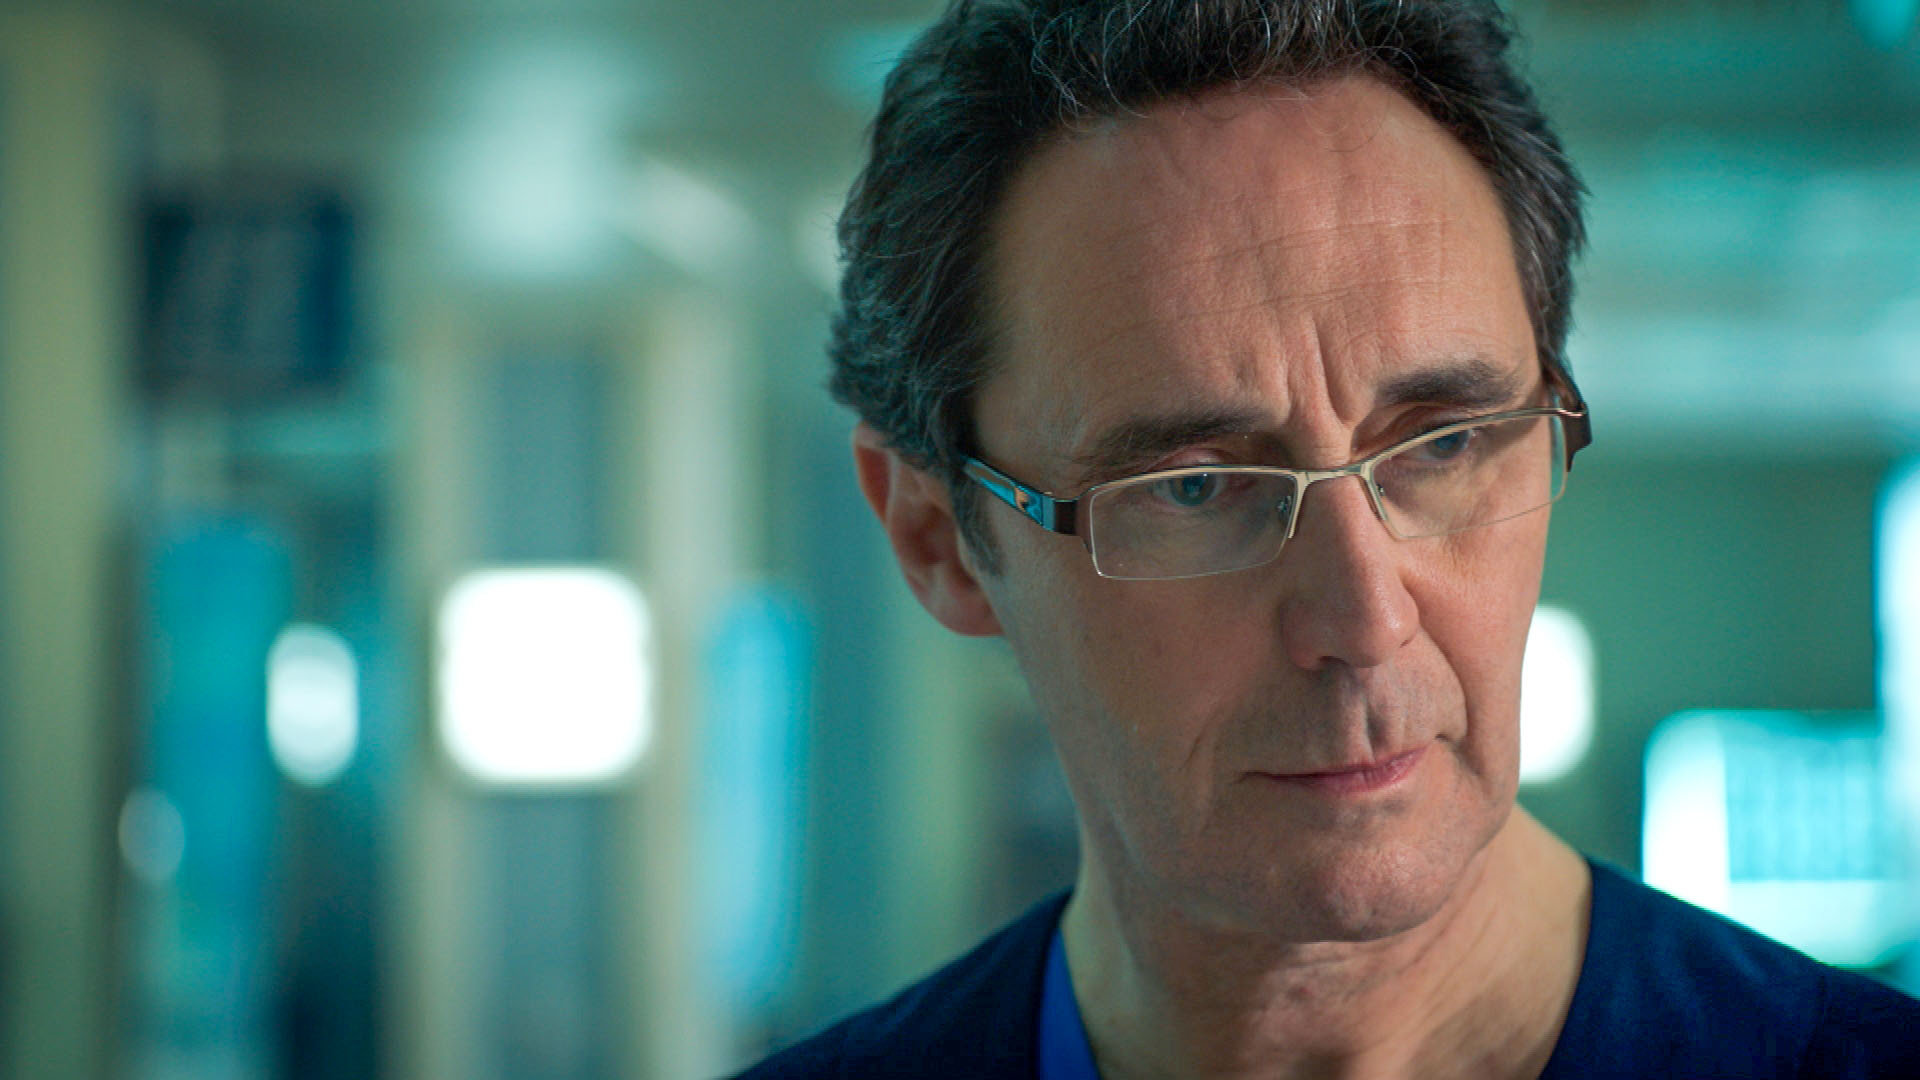 Holby City spoilers: A shock for Hanssen and desperate times for Cameron